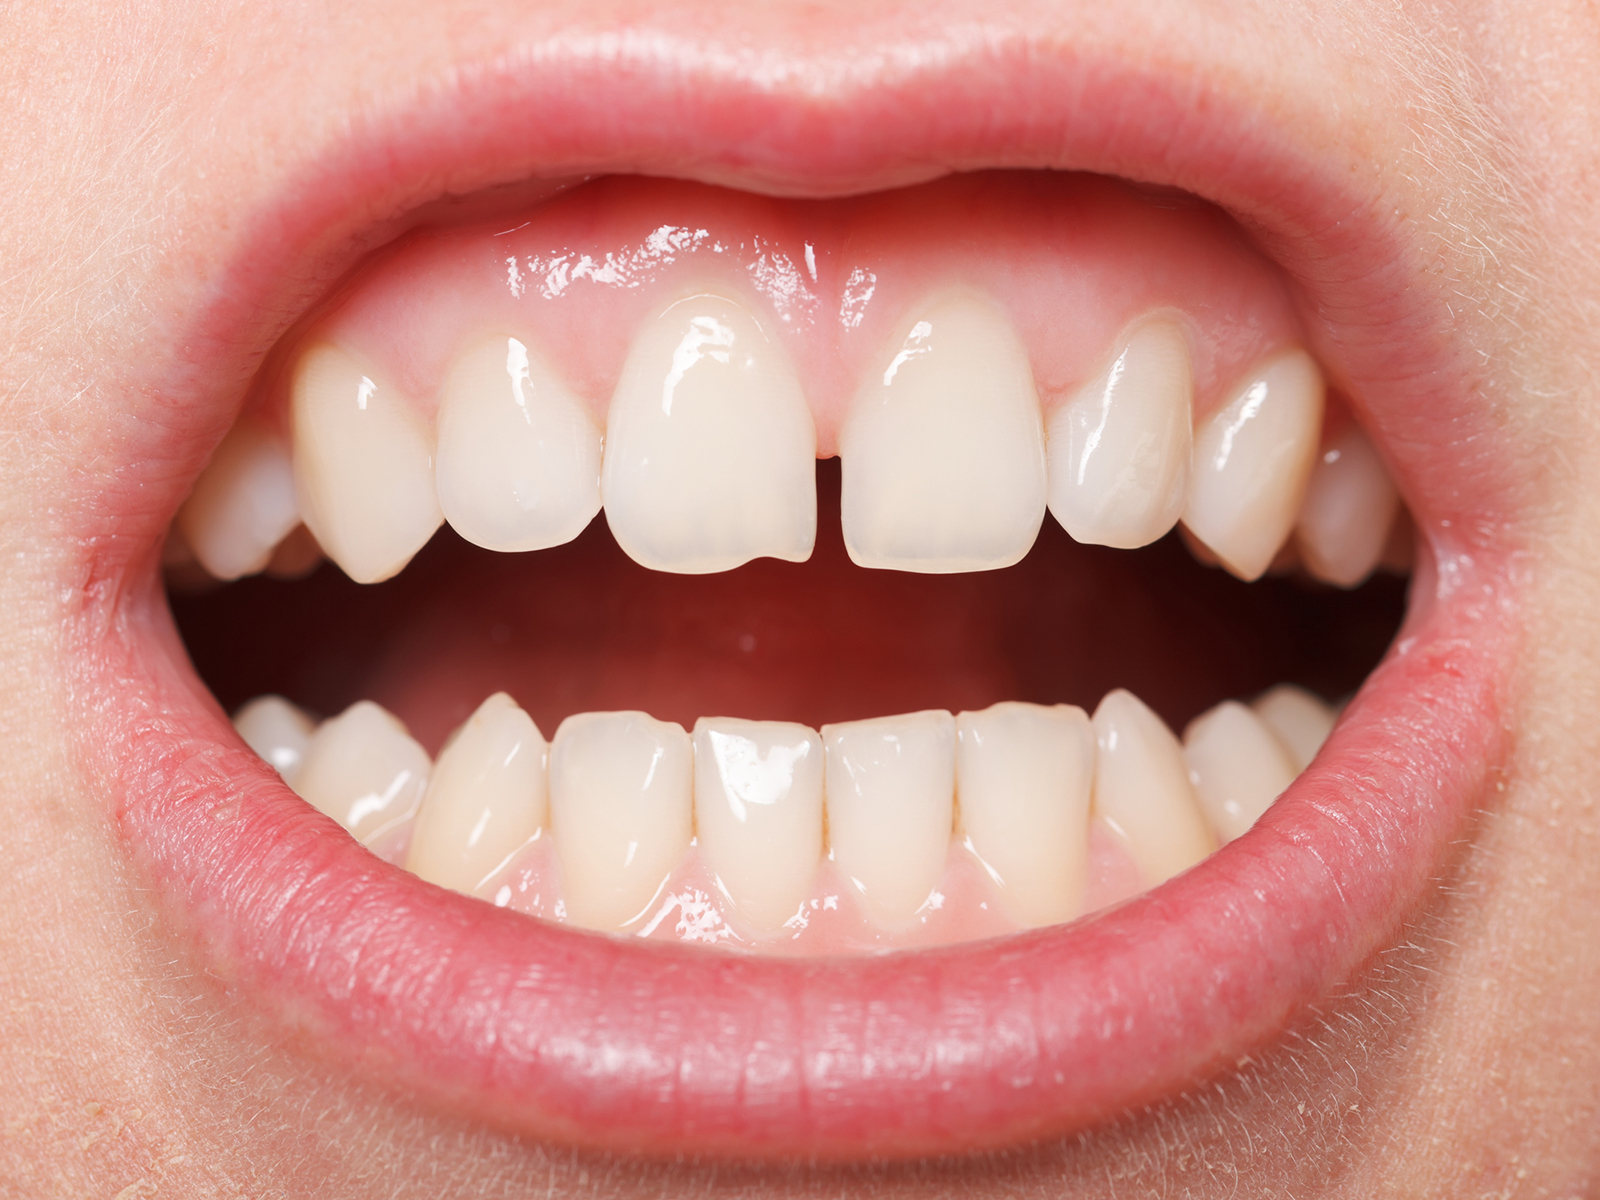 Options for Filling Tooth Gaps